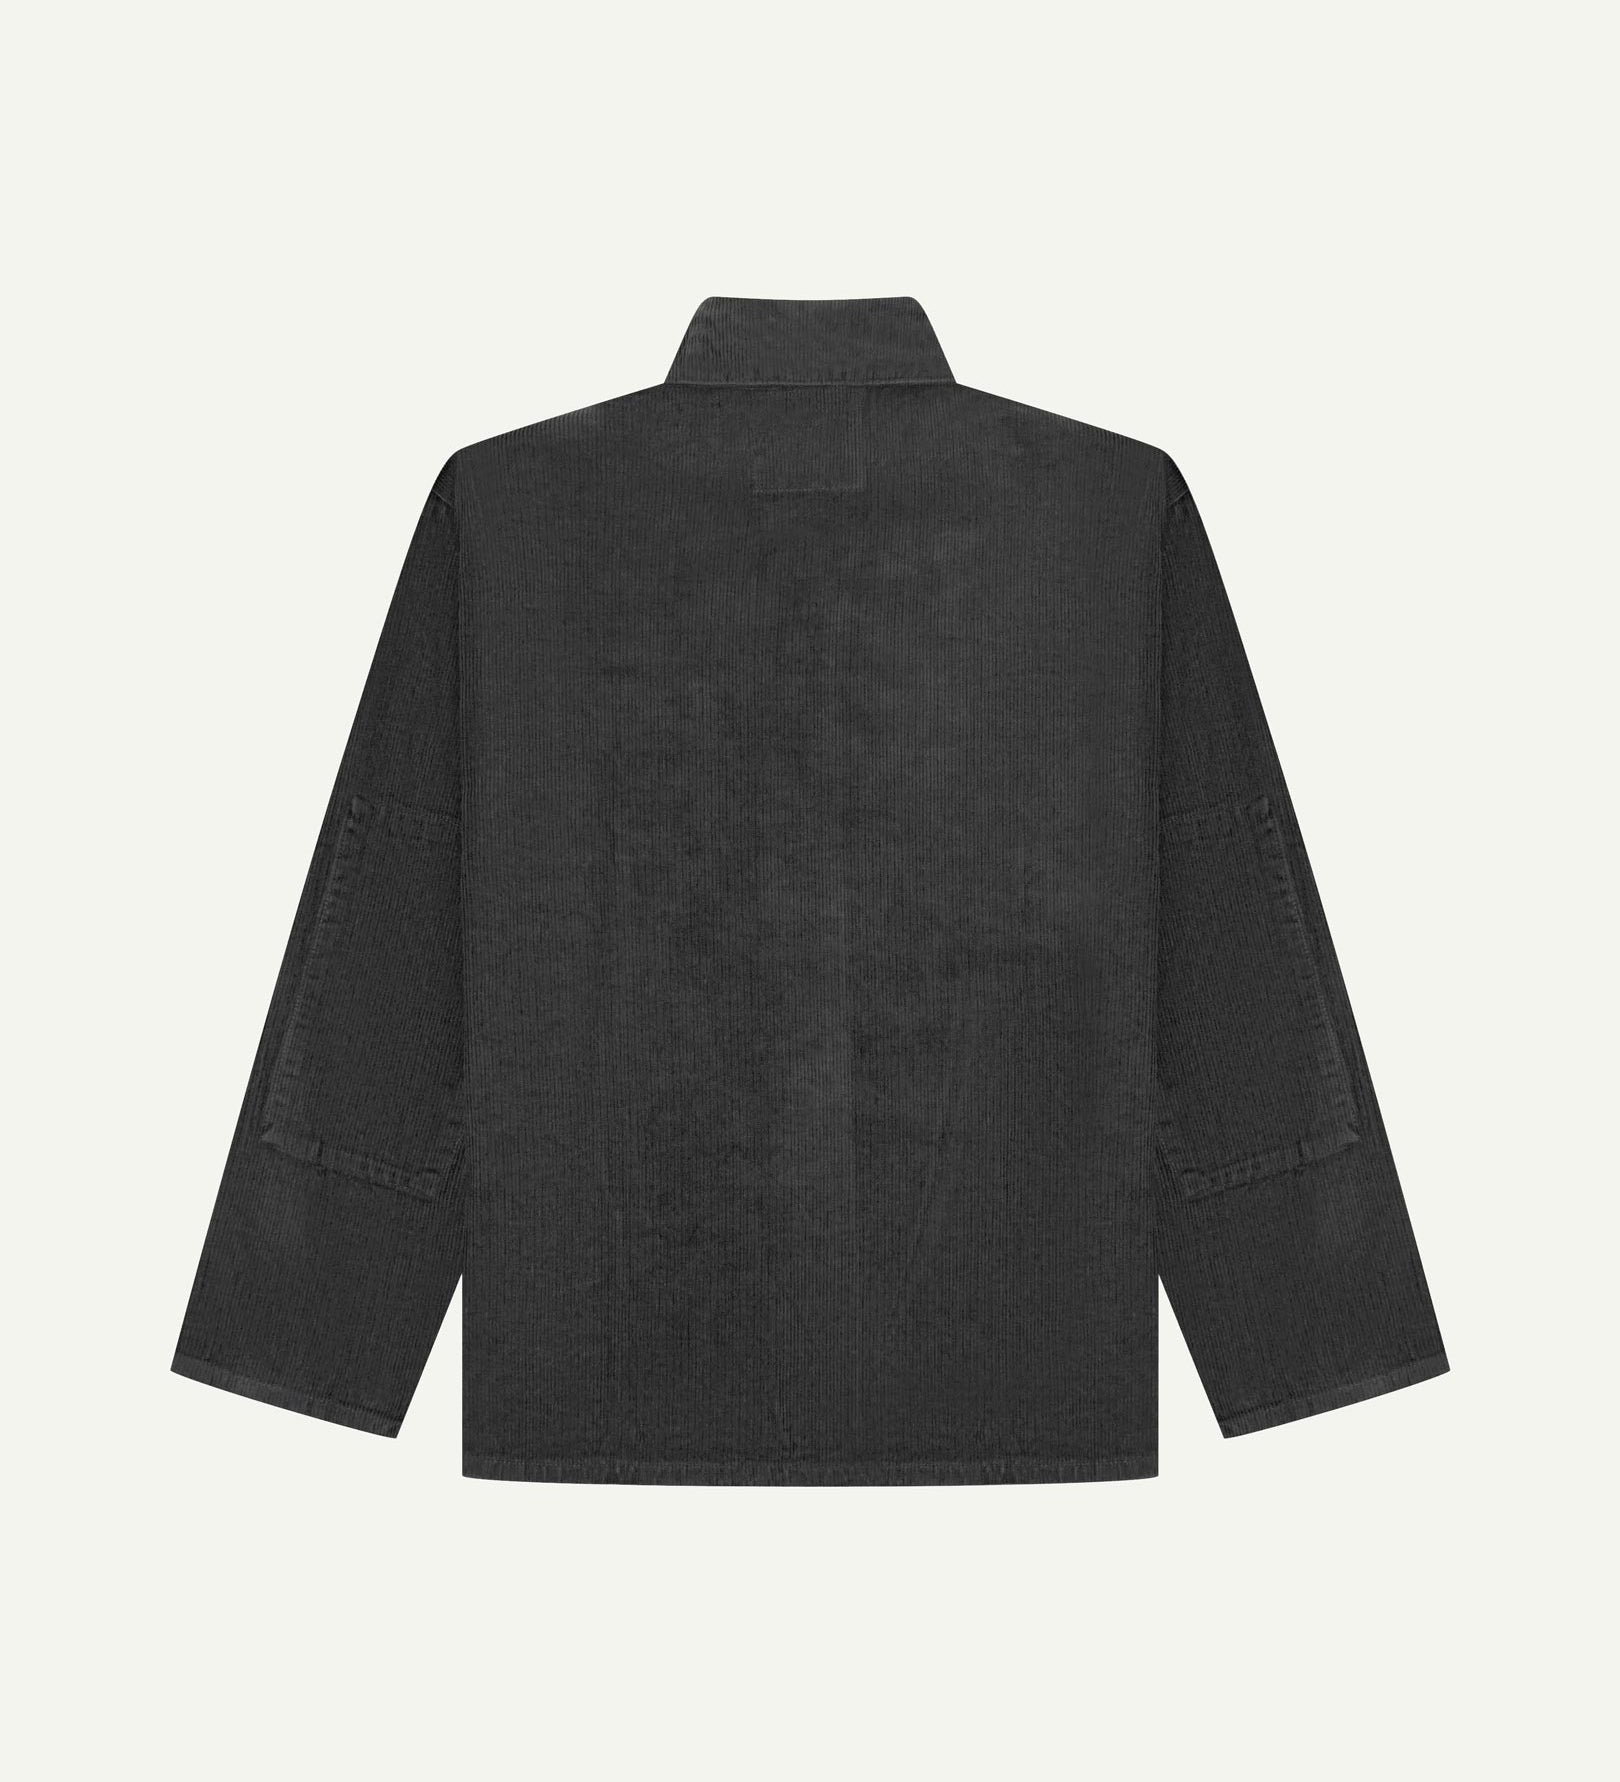 Back view of faded black, buttoned corduroy overshirt with view of reinforced elbow area and boxy silhouette.